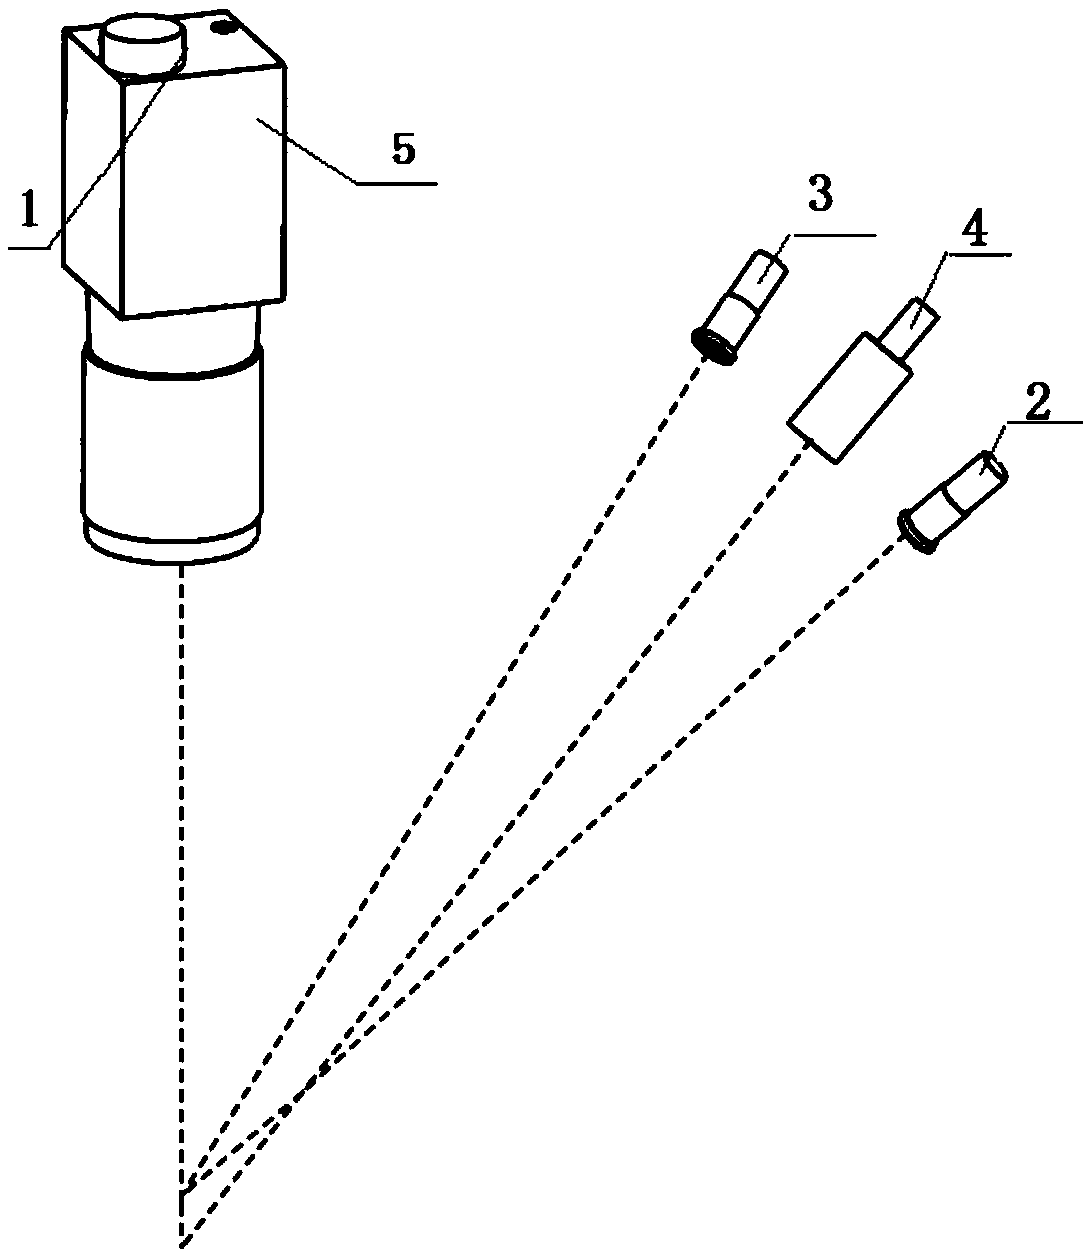 Welding stud position detection device and method based on silhouette technology